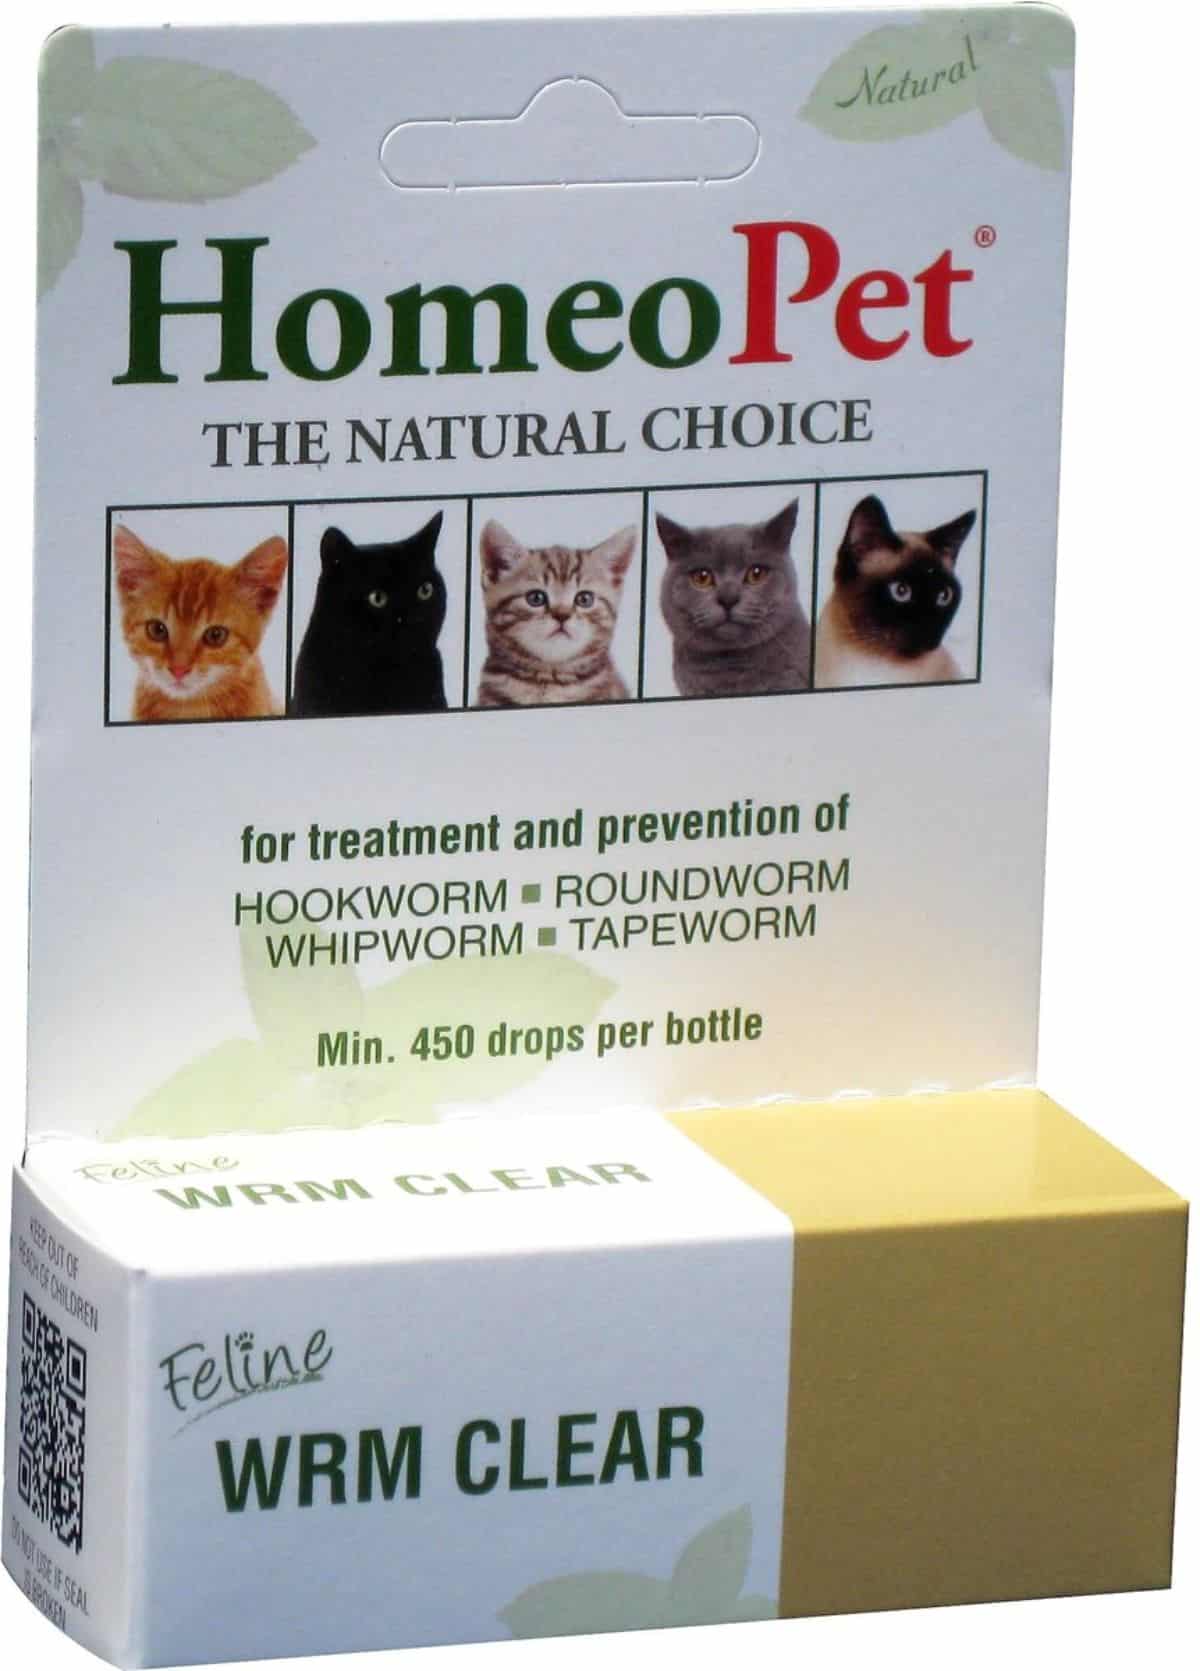 HomeoPet WRM Clear Dewormer for Hookworms, Roundworms, Tapeworms & Whipworms for Cats